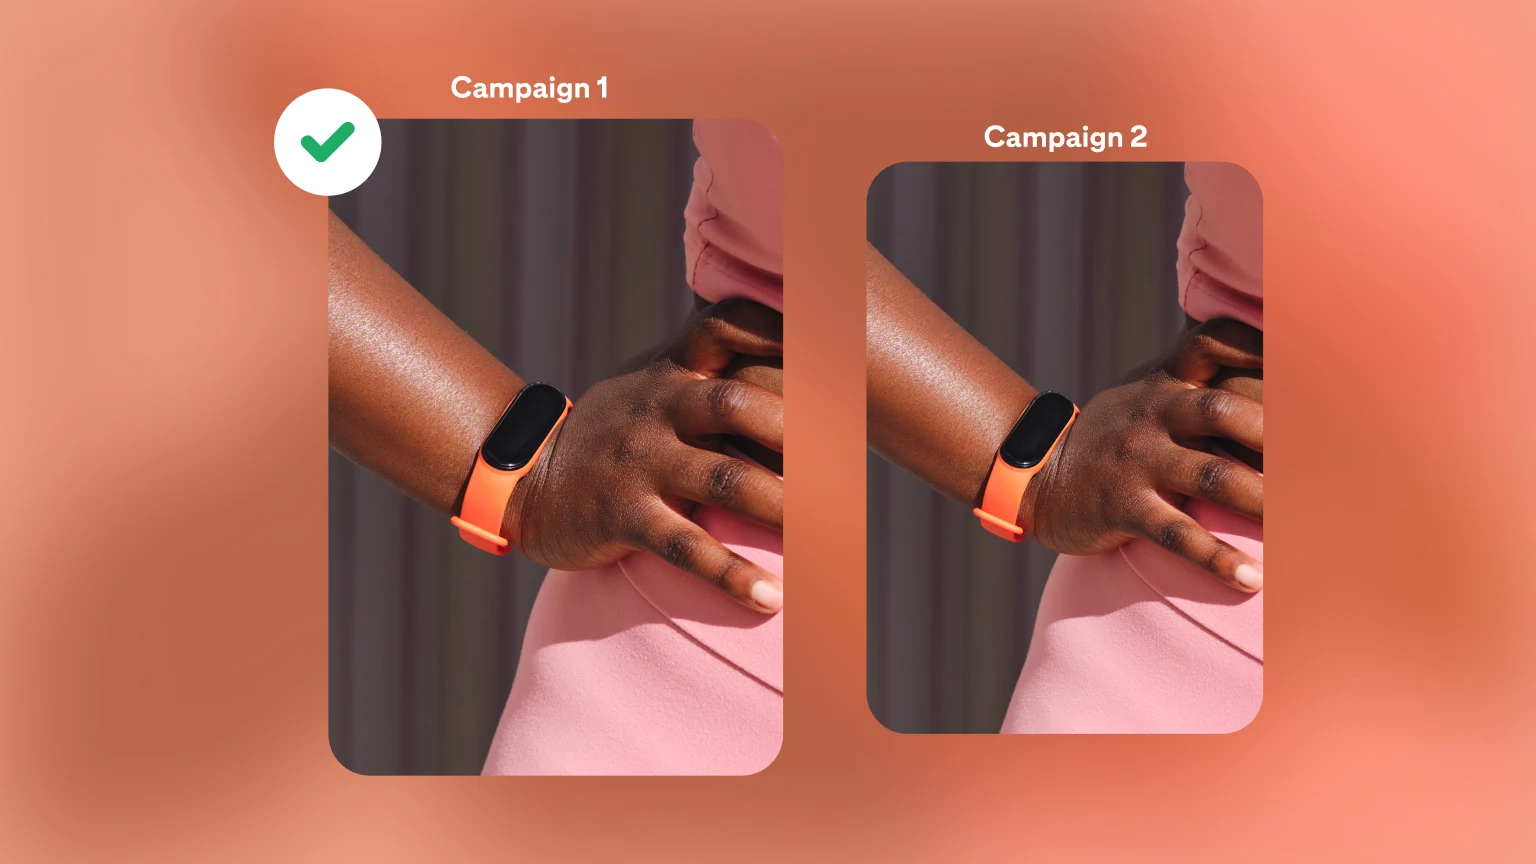 Two campaigns for watches are set on a vibrant orange background. Campaign 1 is highlighted as the winner by a green tick.